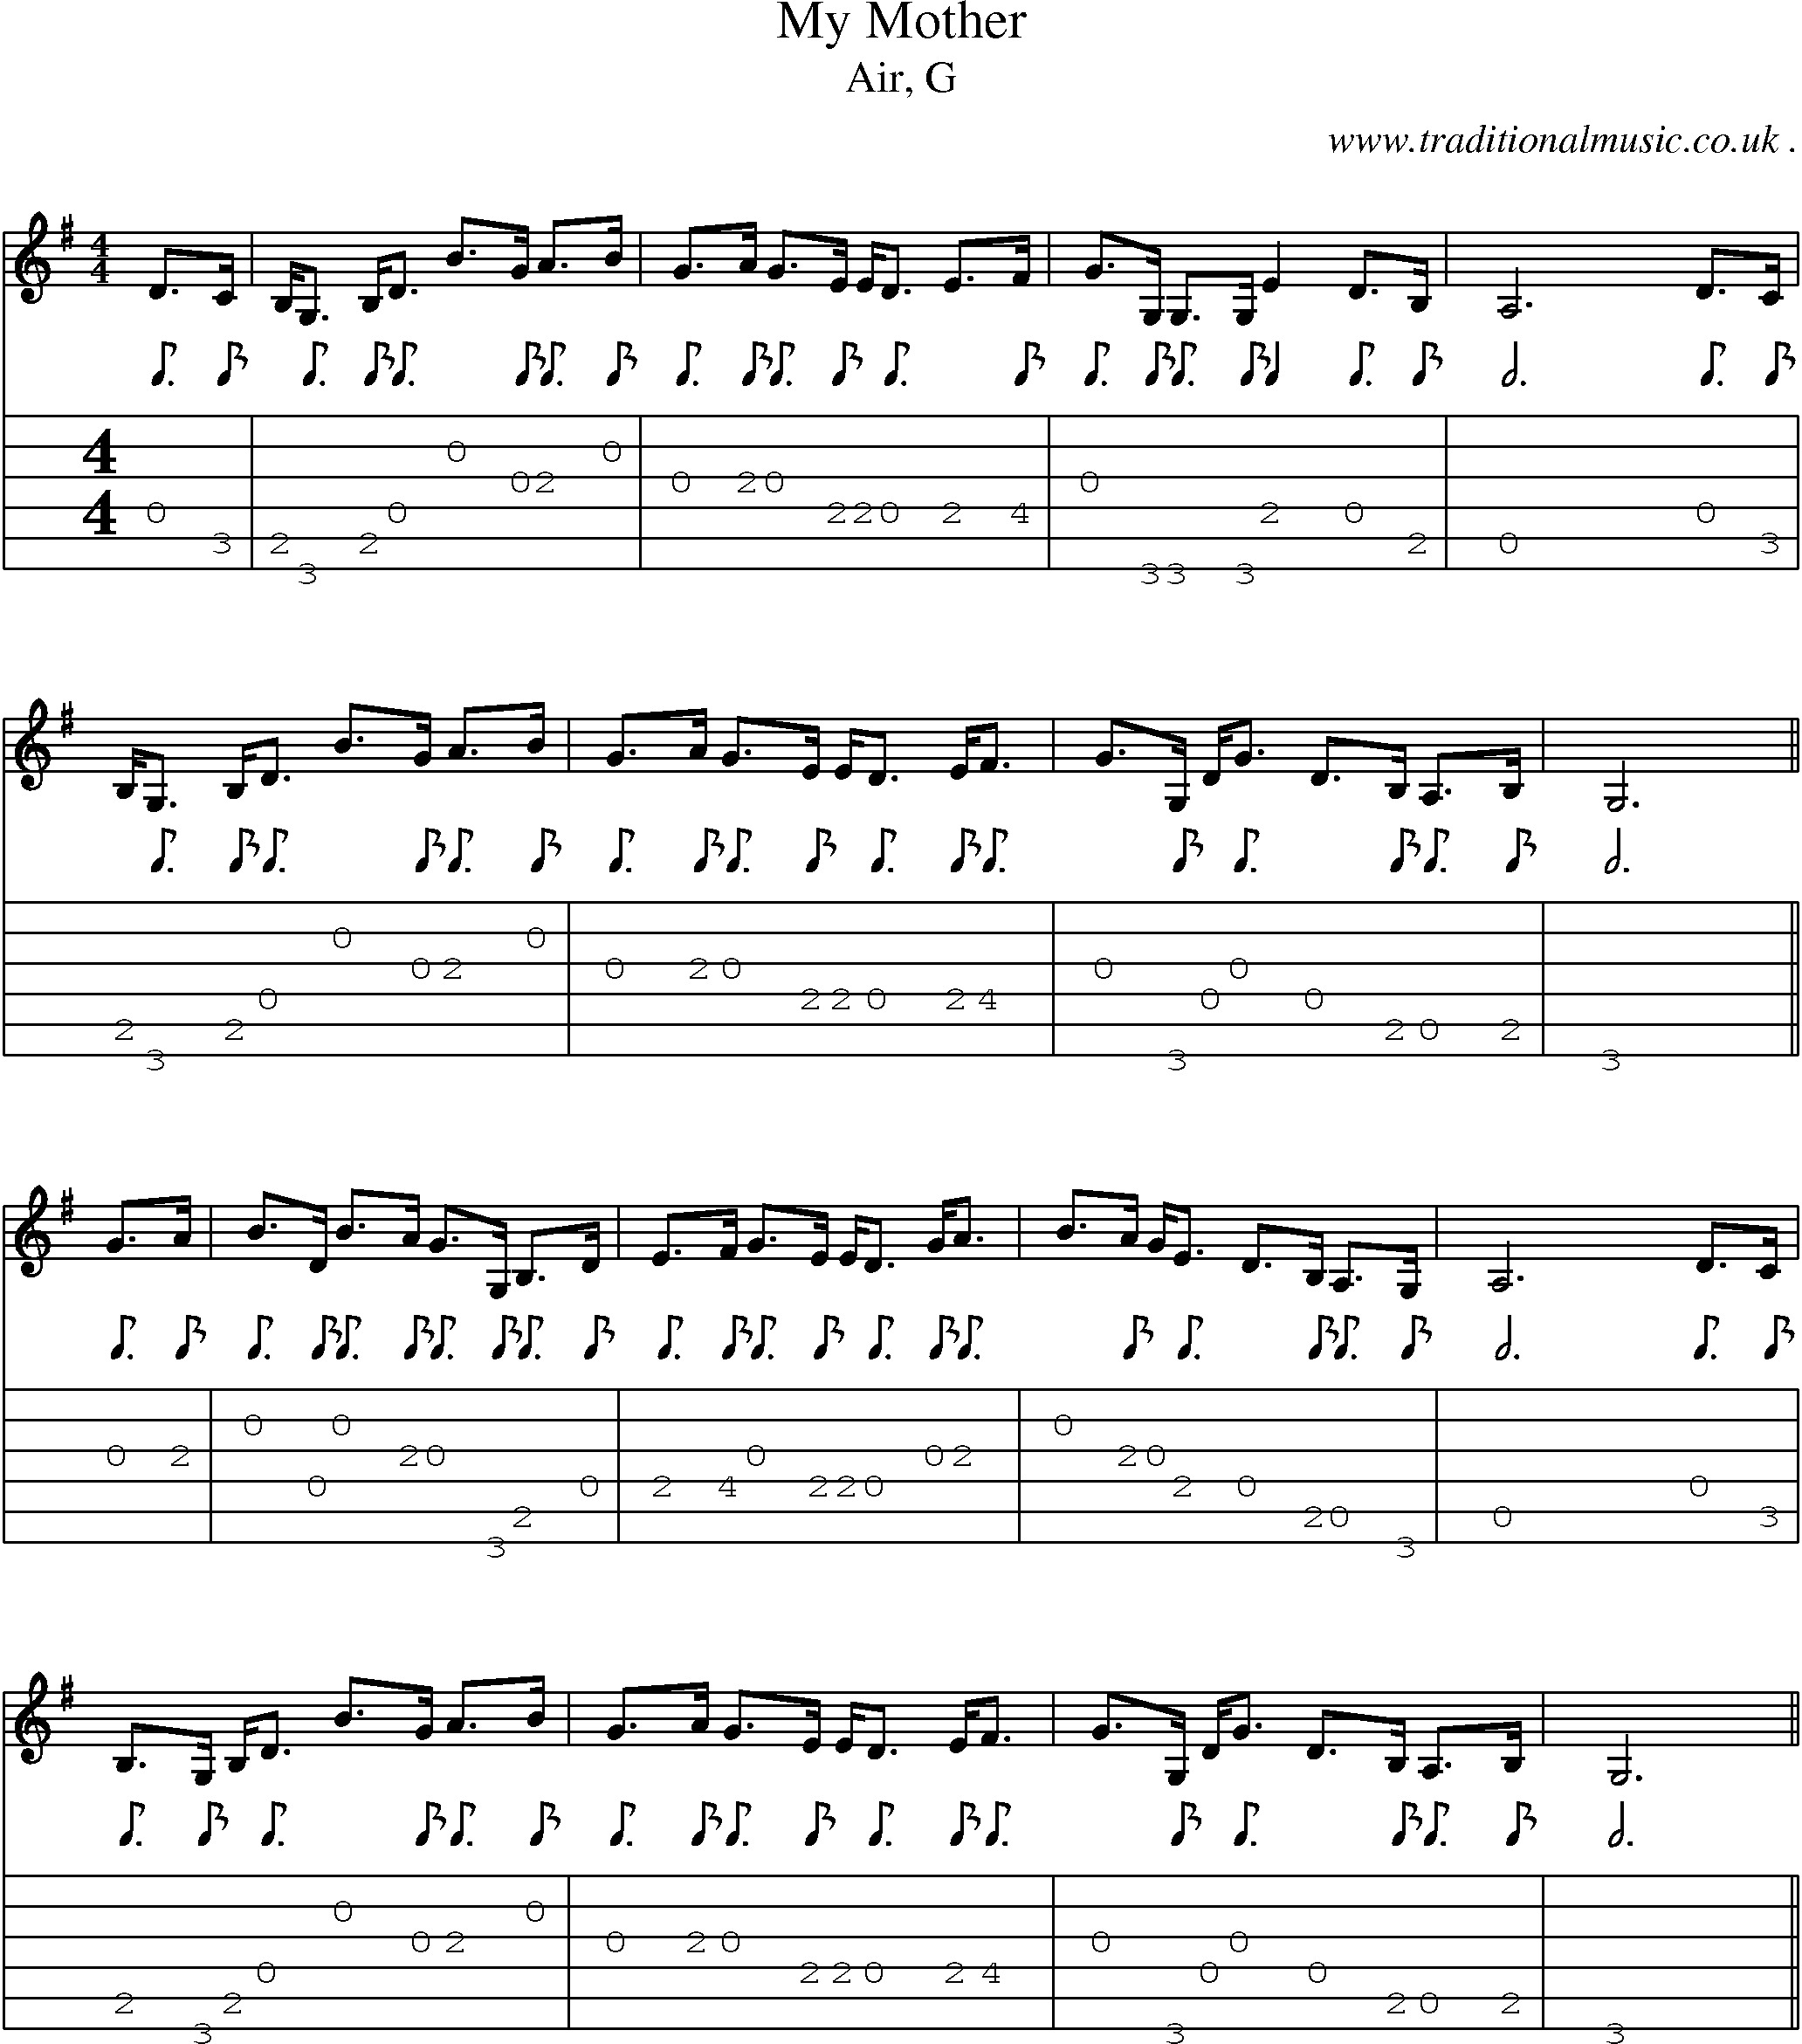 Sheet-music  score, Chords and Guitar Tabs for My Mother